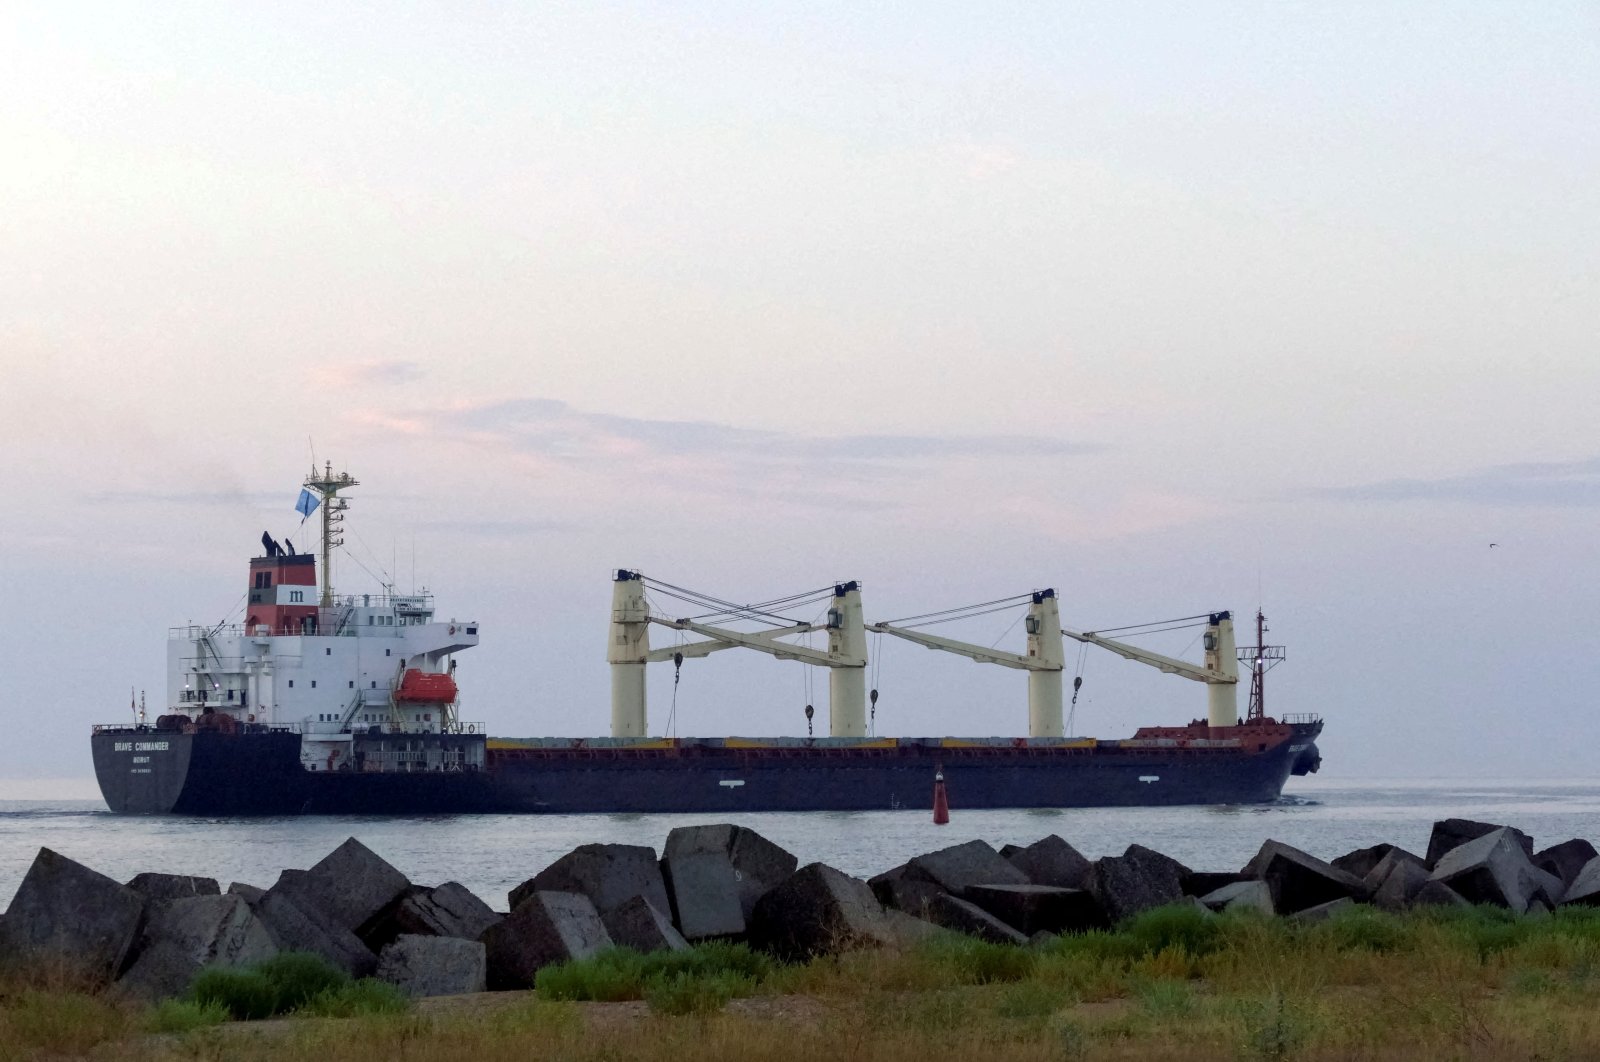 The Lebanese-flagged bulk carrier Brave Commander leaves the sea port of Pivdennyi with wheat for Ethiopia after the grain export resumption, in the town of Yuzhne, Odessa region, Ukraine Aug. 16, 2022. (Reuters Photo)